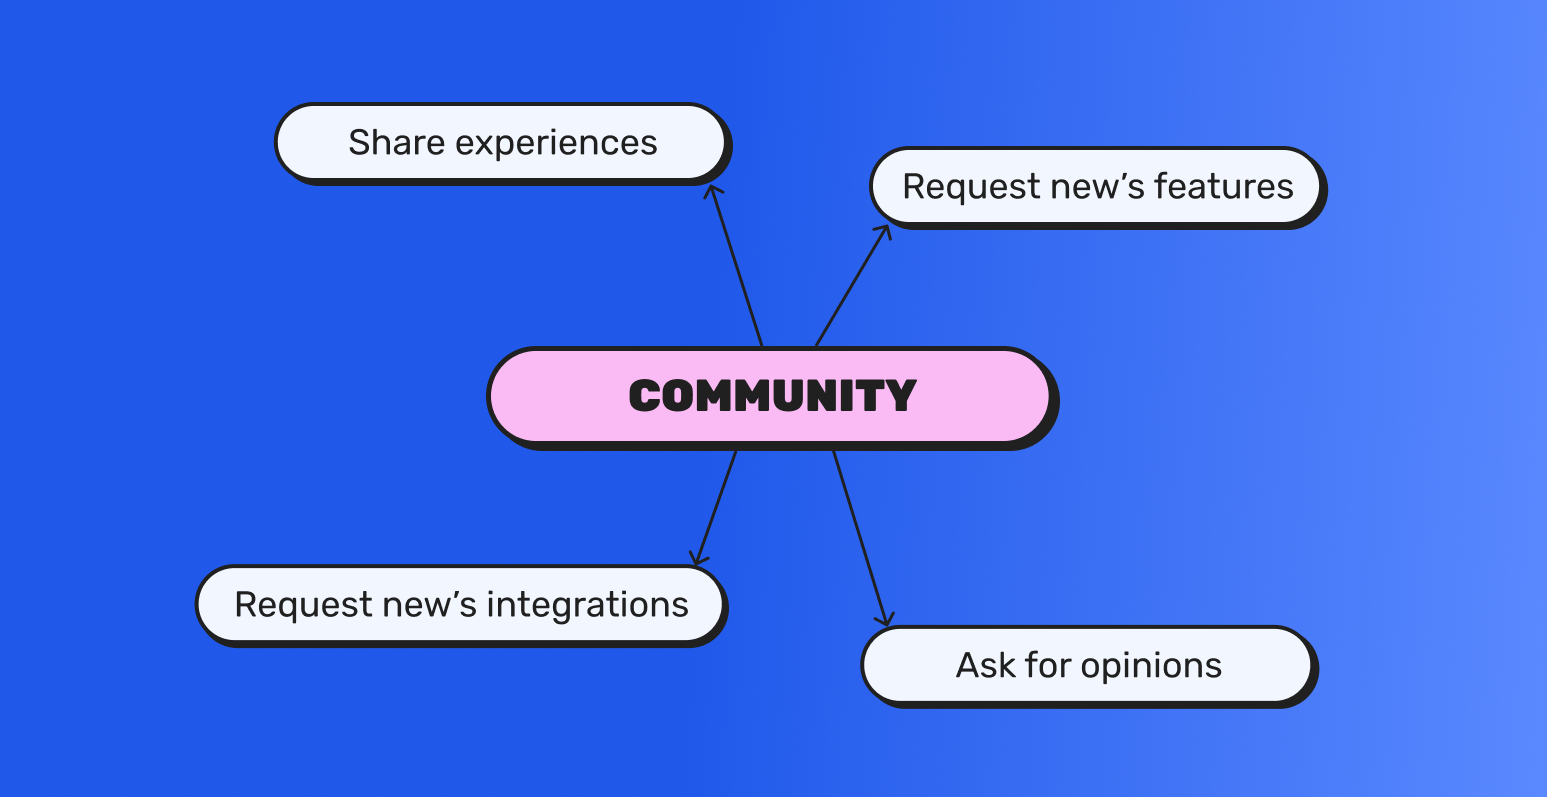 This image features a mind map with the main topic of 'Community', and four sub-topics branching out from it: 'Sharing Experiences', 'Requesting New Features', 'Requesting New Integrations', and 'Asking for Opinions'.